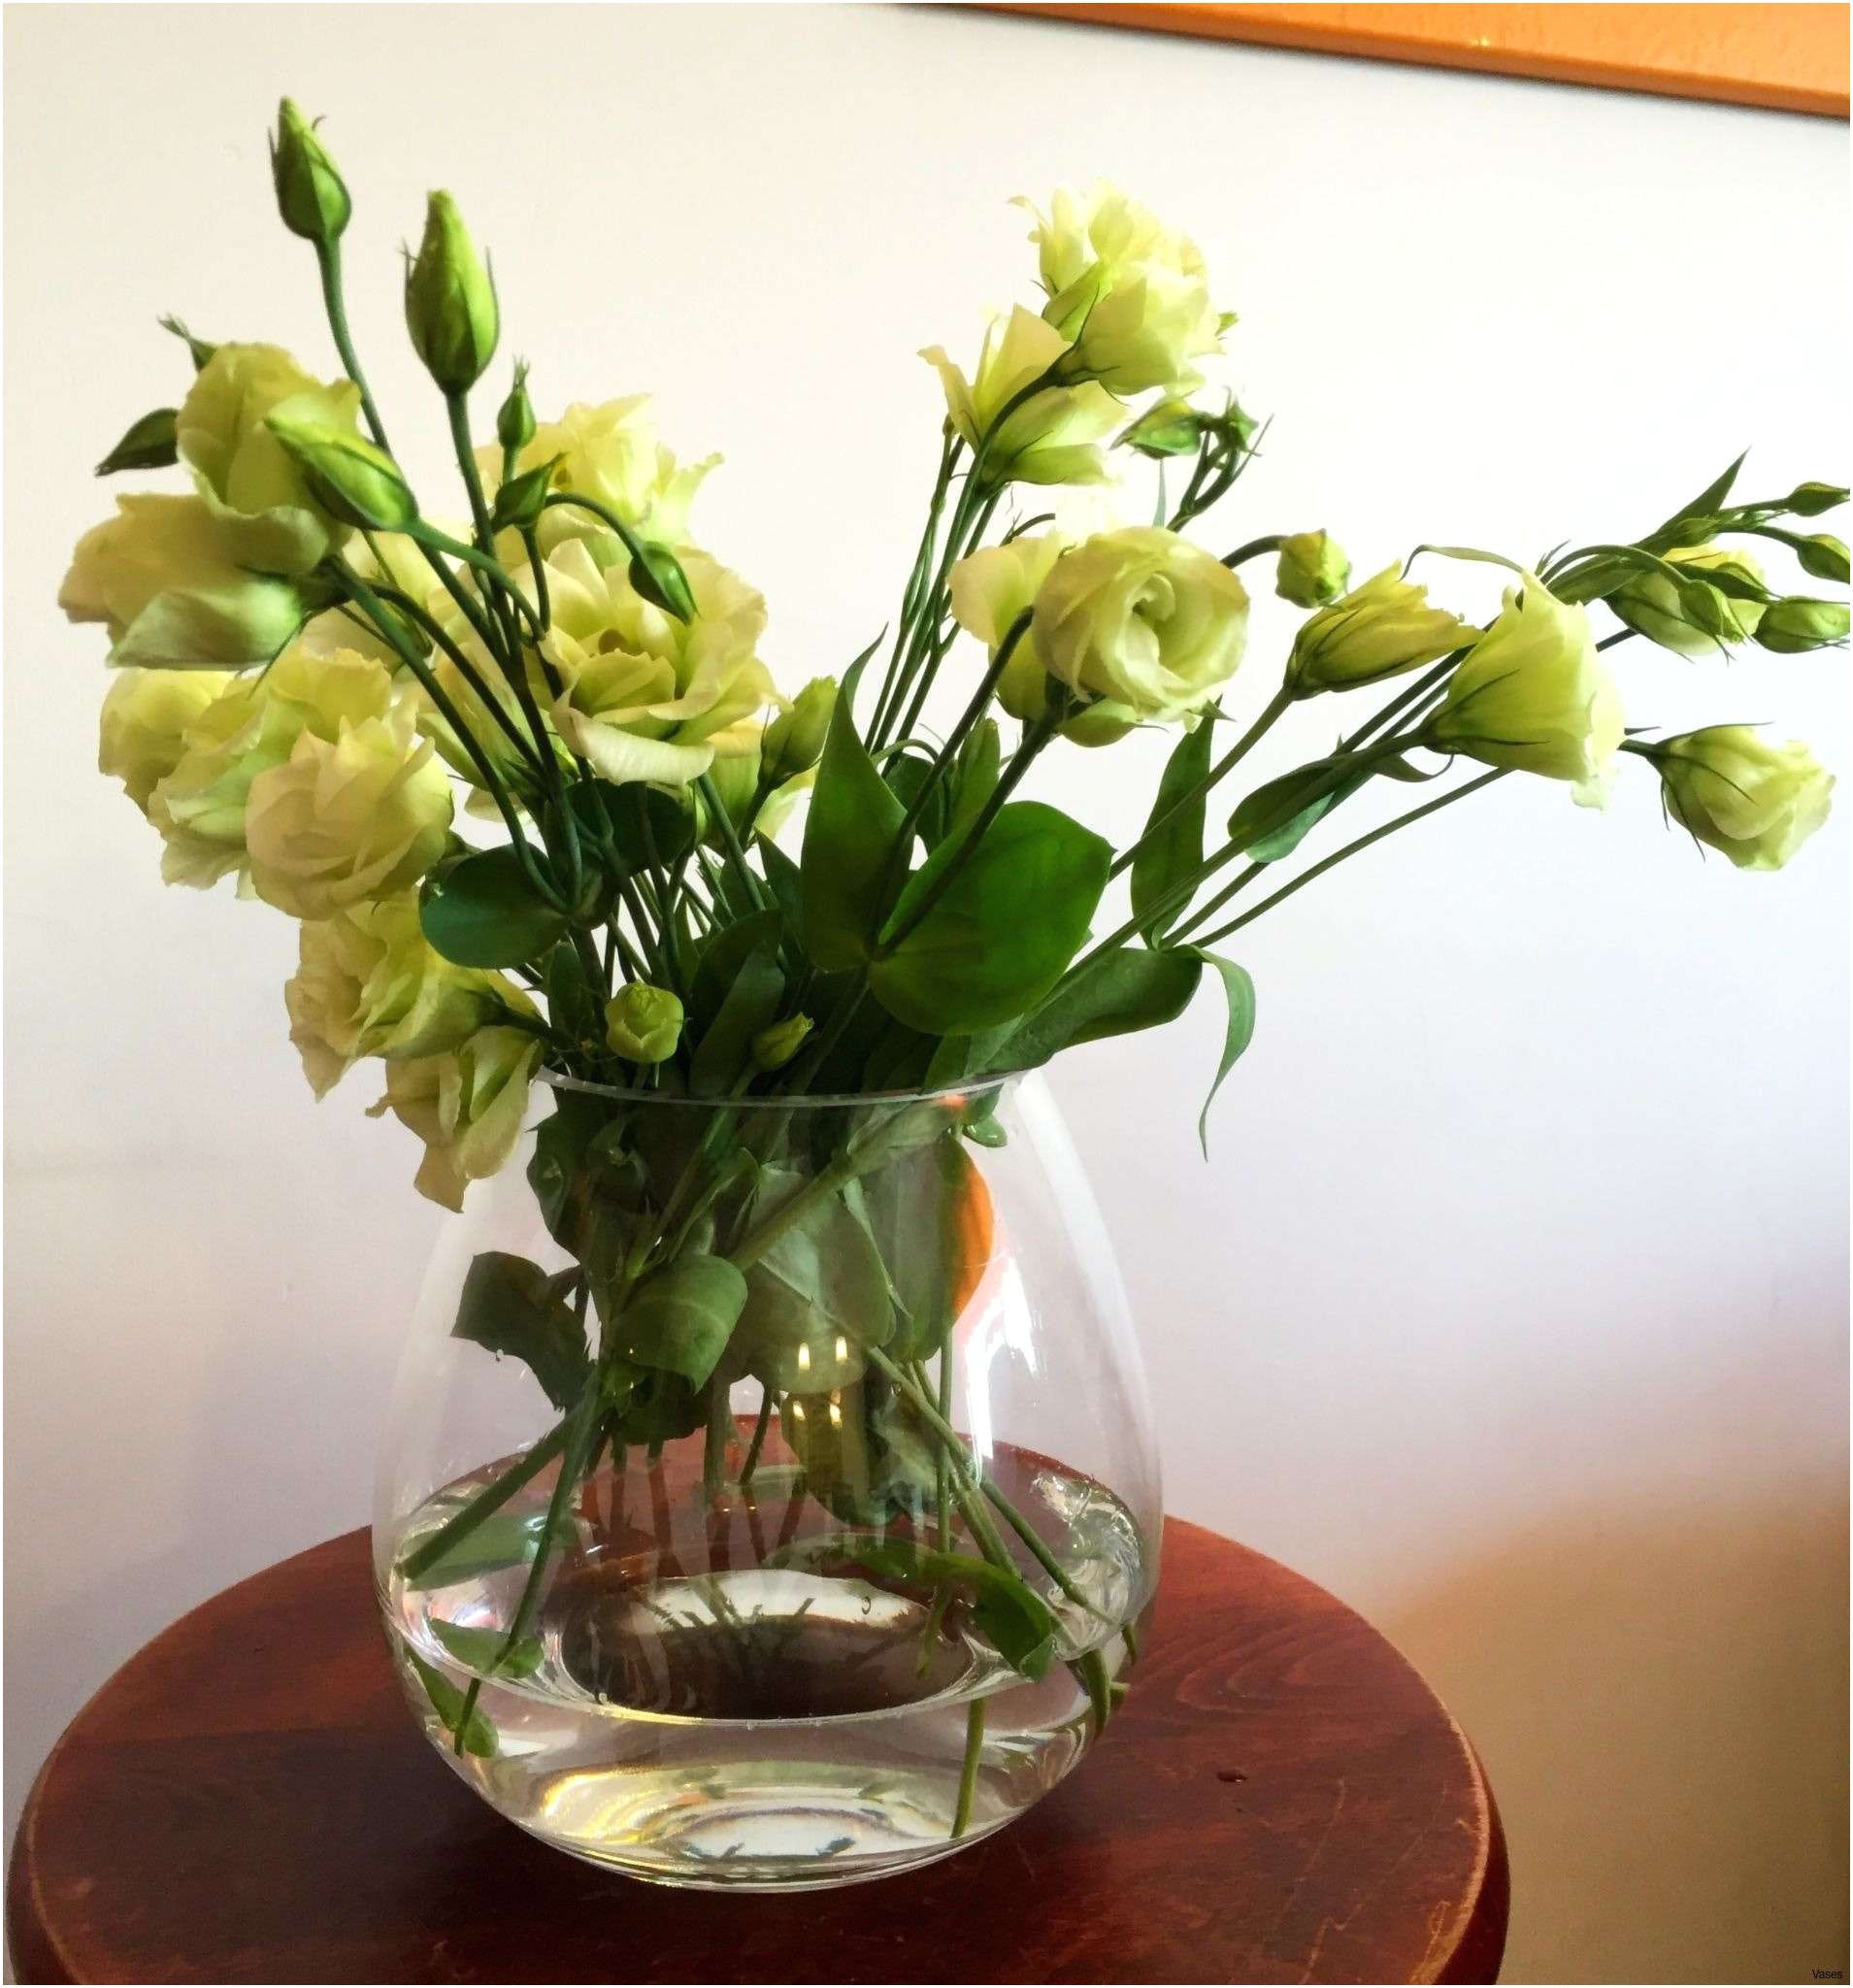 30 Elegant Fenton Glass Small Vase 2024 free download fenton glass small vase of tall green glass vase image tiger height awful flower vase table 04h pertaining to tall green glass vase image tiger height awful flower vase table 04h vases table